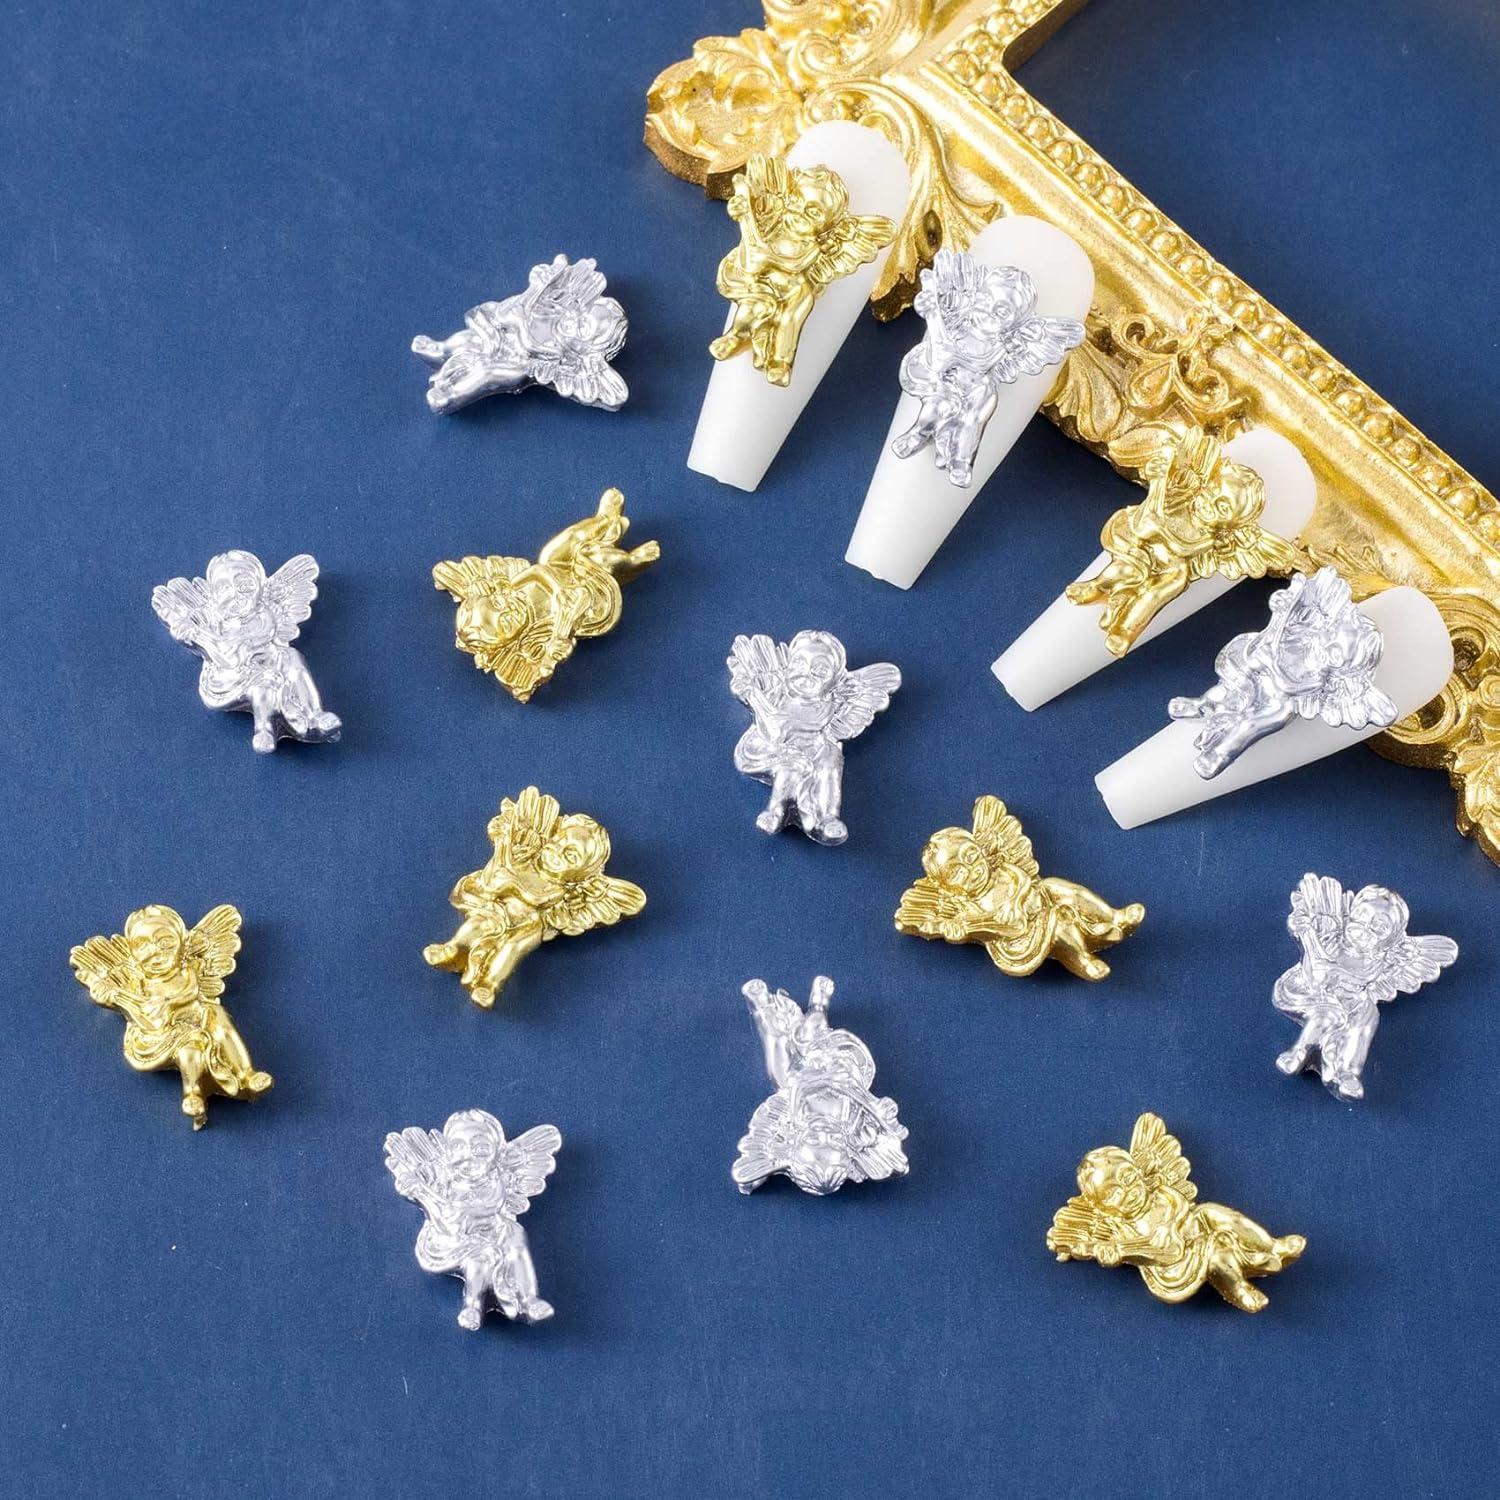 WOKOTO 90PCS White Embossed Angel Nail Charms For Acrylic Nails 3D Angel  Baby Nail Art Charms Retro Baroque Cupid Designs Nail Art Accessories  Jewelry Decorations For Women Nail Supplies KIT1